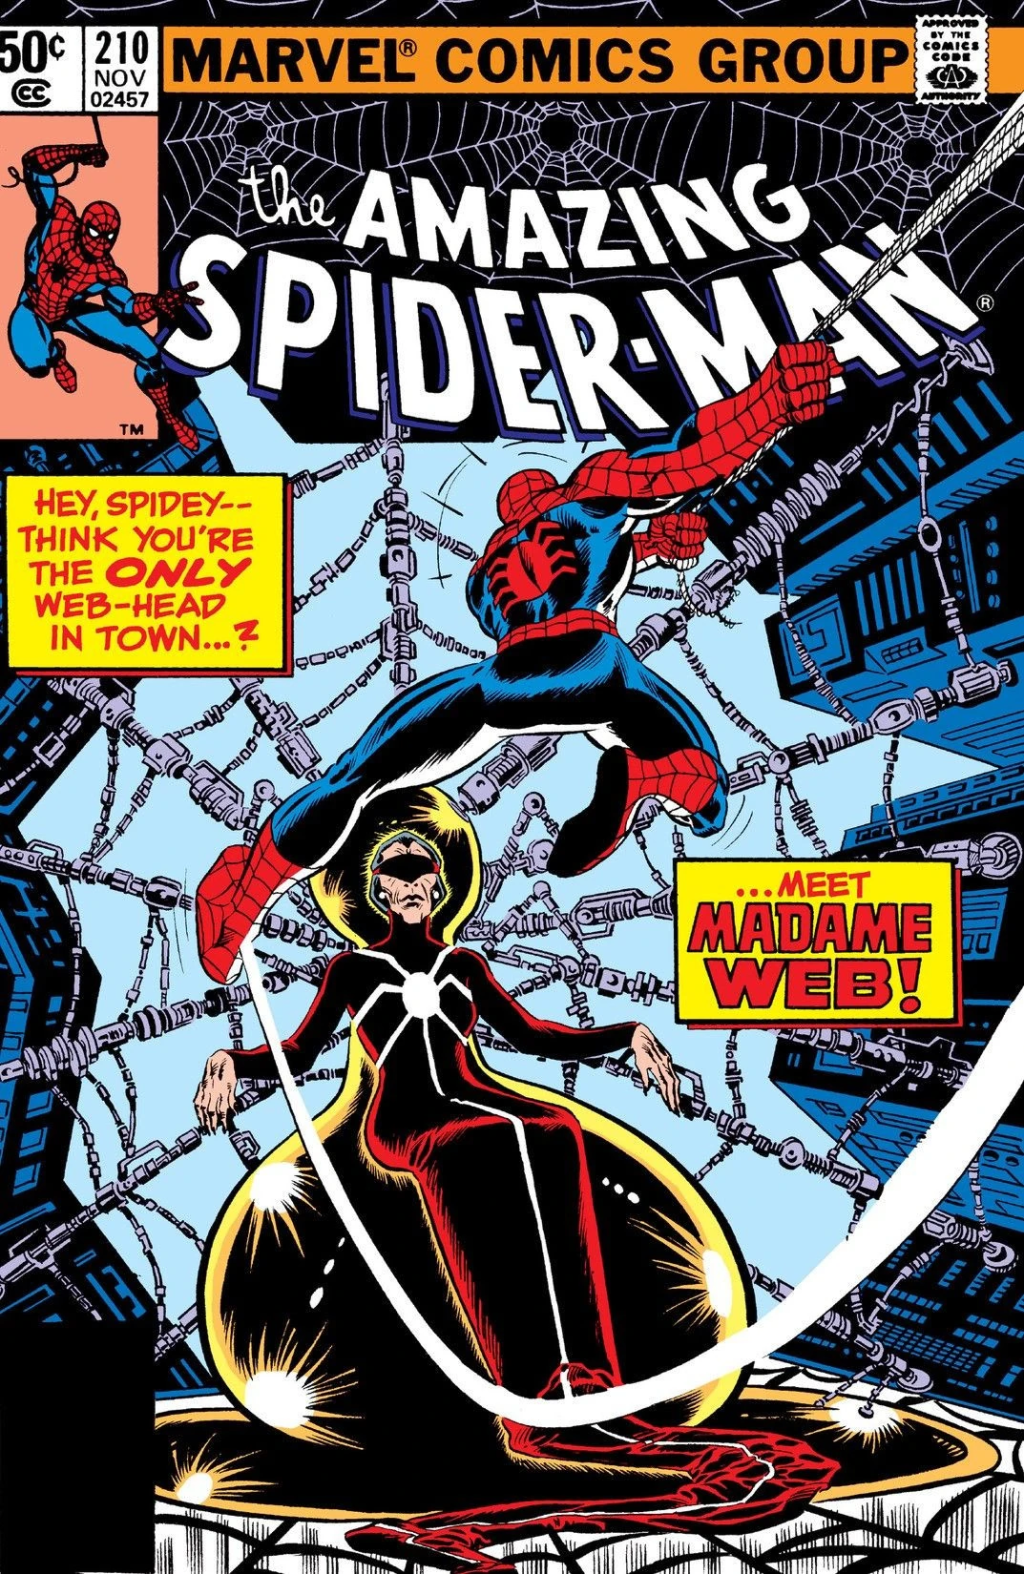 Spider-Man crosses path with Madame Web on John Romita Jr. and Allen Milgrom's cover to Amazing Spider-Man Vol. 1 #210 "The Prophecy of Madame Web!" (1980), Marvel Comics